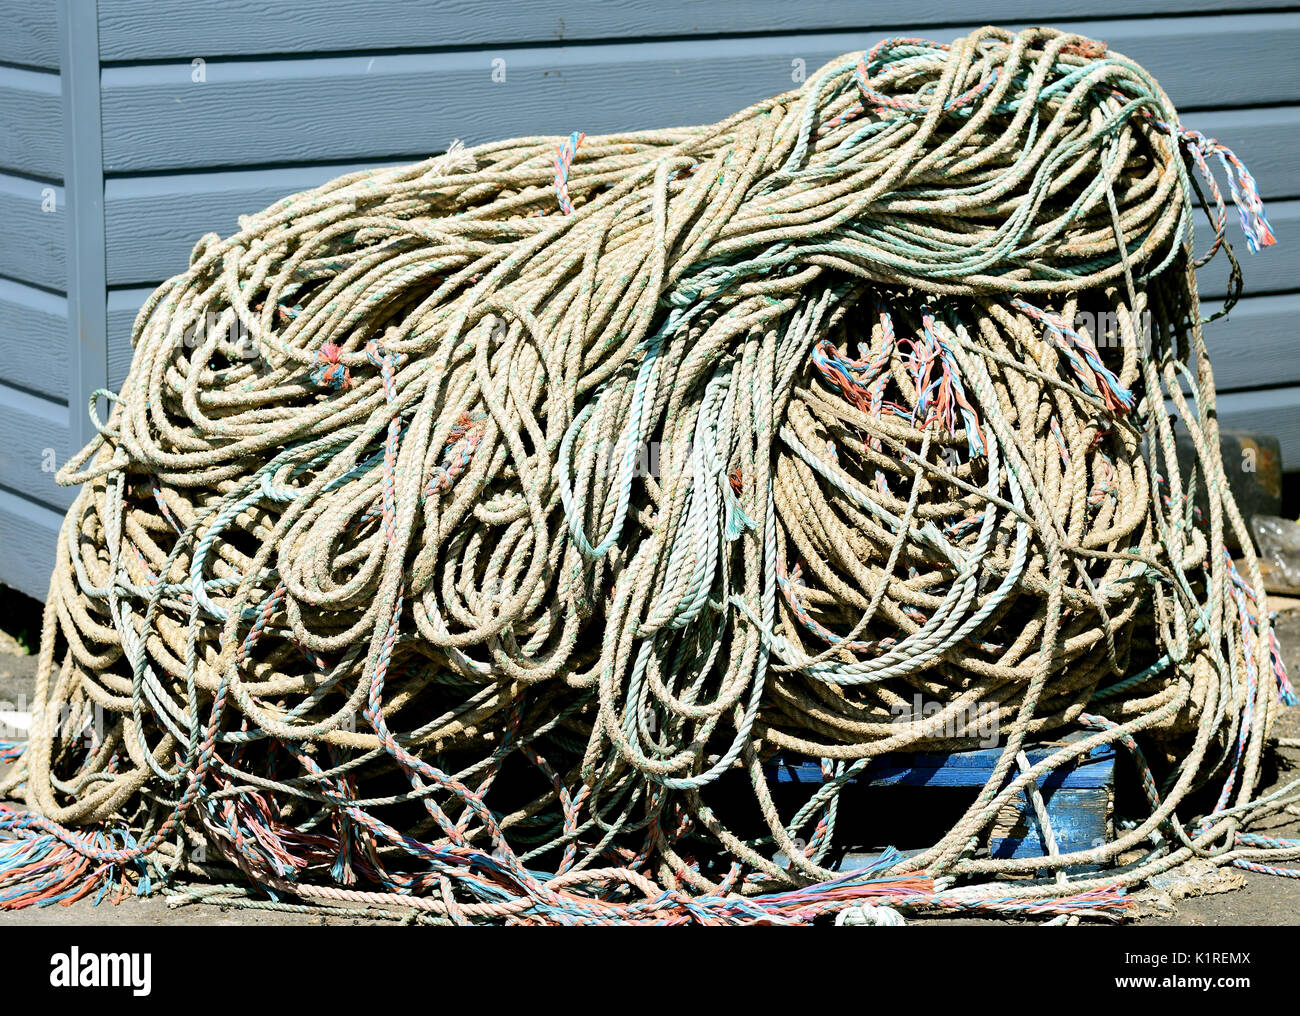 A pile of fishing rope on the quayside. Stock Photo